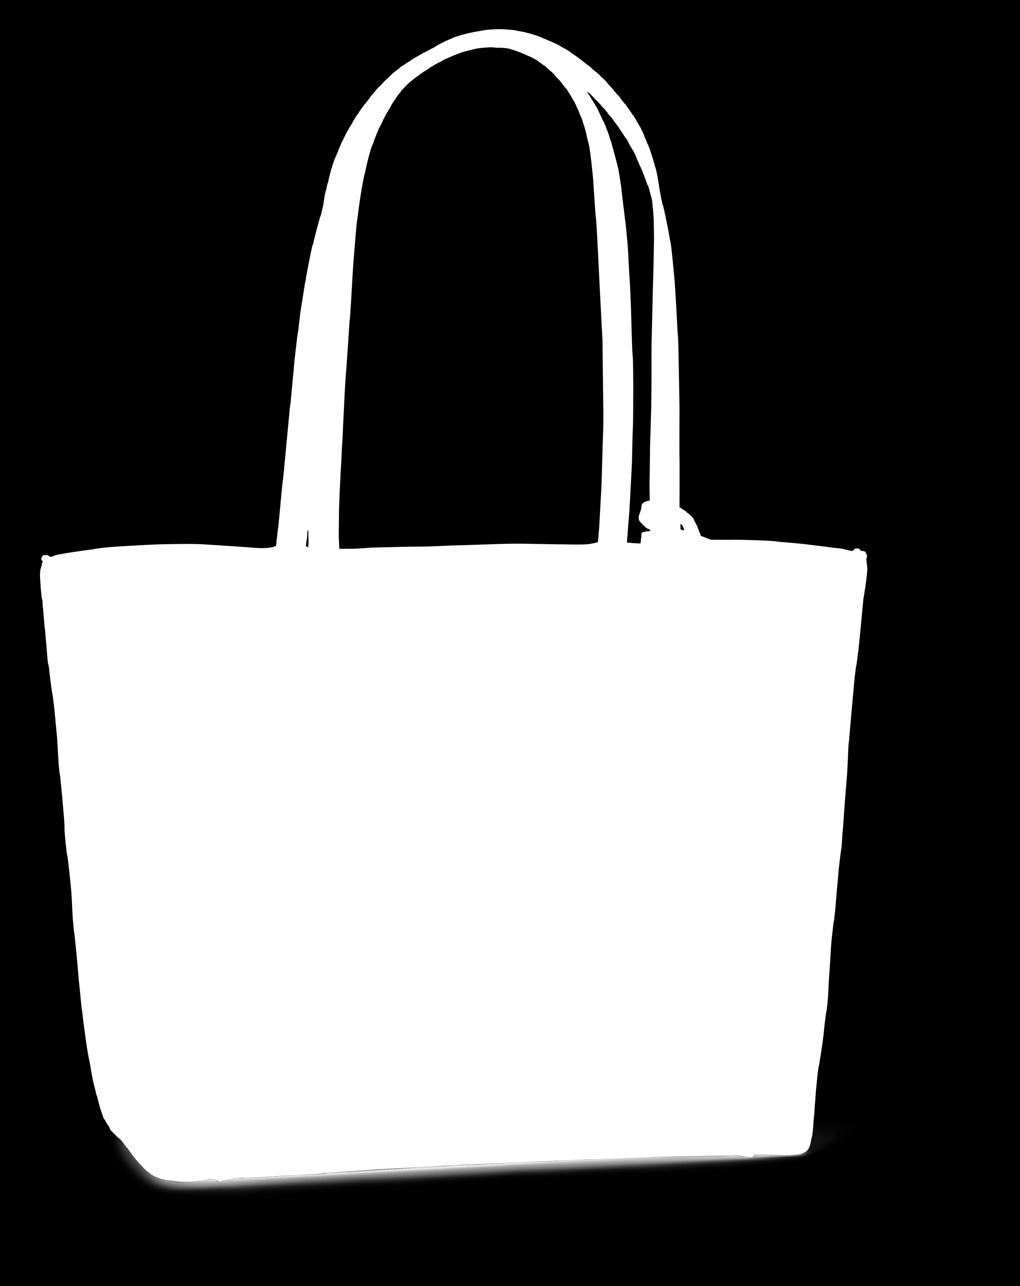 tote. Features lobster claw closure, an interior zipper pocket